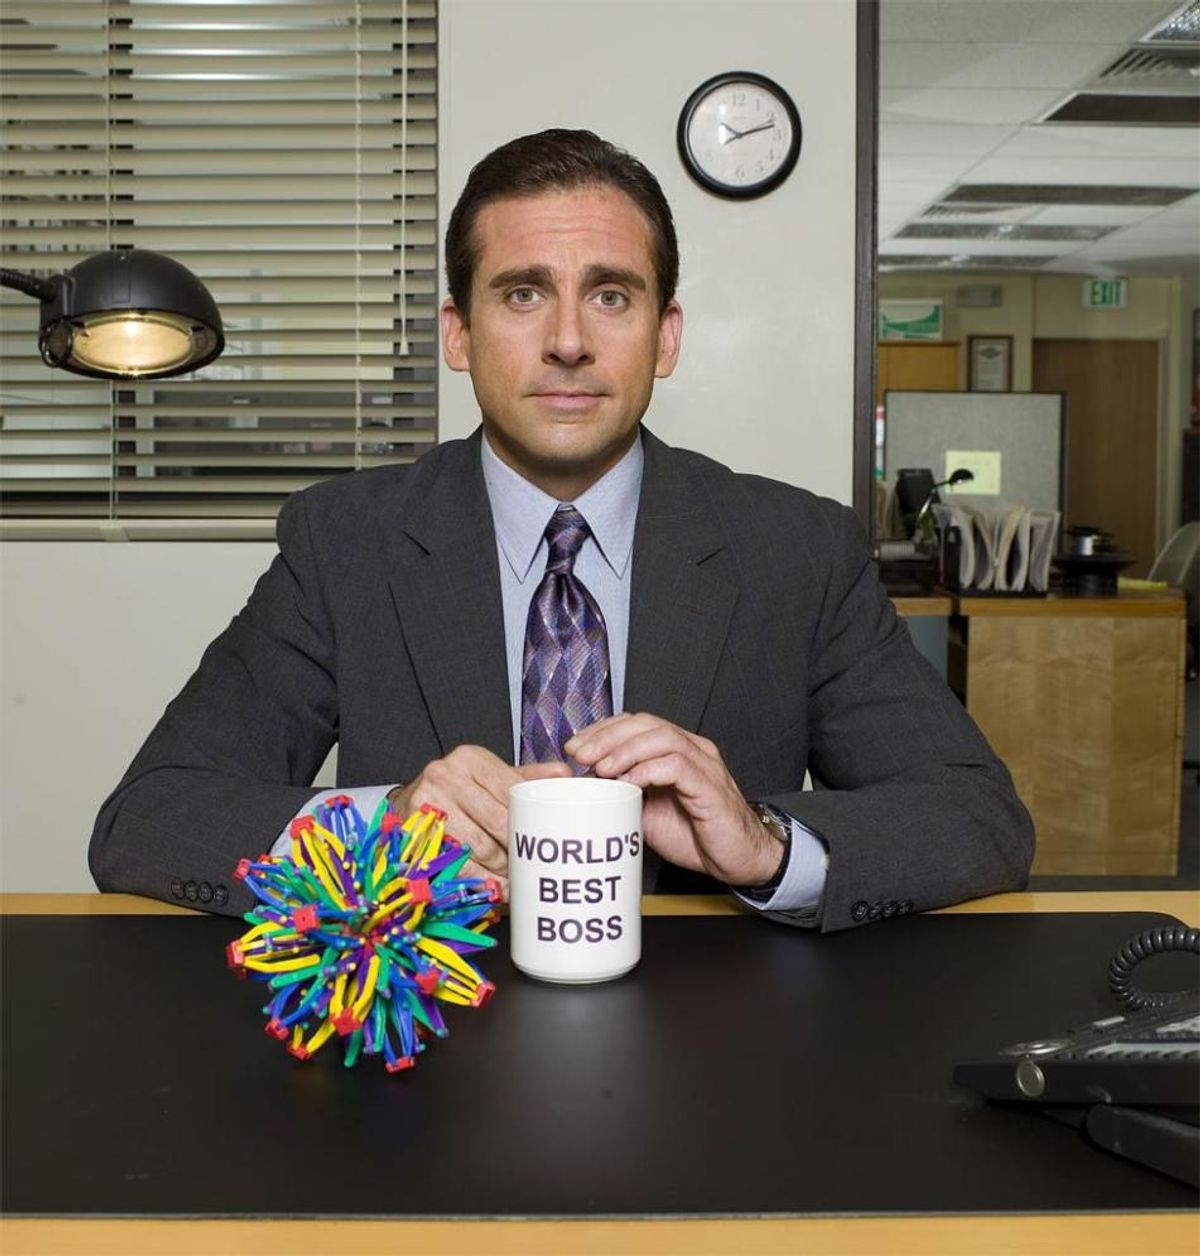 Going Back To School, As Told By Michael Scott